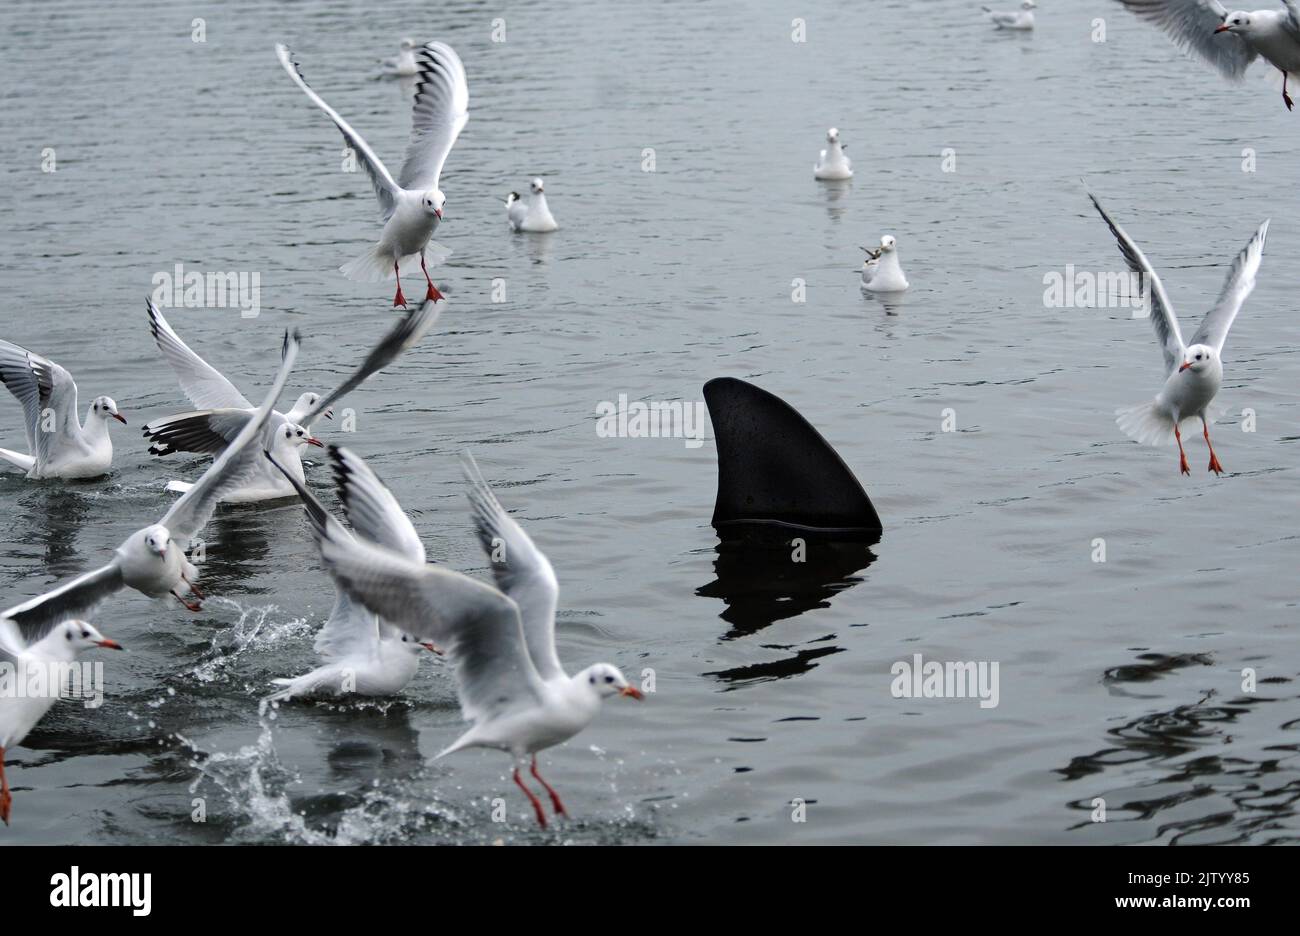 CAUGHT ON CAMERA. SEAGULLS MOB A SHARK THAT APPEARED AT SOUTHSEA, HAMPSHIRE. THE SINISTER TELL TALE FIN APPEARS TO CUT ACROSS THE WATER TO THE DISMAY OF THE LOCAL BIRD POPULATION BUT ALL IS NOT AS IT APPEARS. A NEW YEAR PRANKSTER HAS CAUSED DISMAY FOR VISITORS AND RESIDENTS ALIKE BY SECURING A METAL FIN INTO THE CANOE LAKE AT SOUTHSEA. PASSER BY CHRISTINE GILES SAID '' I HAD TO LOOK TWICE AS THE SEAGULLS WERE SWOOPING DOWN ALL AROUND IT BUT THEN I REALISED IT WAS A VERY REALISTIC PRANK''. PIC MIKE WALKER, MIKE ALKER PICTURES Stock Photo